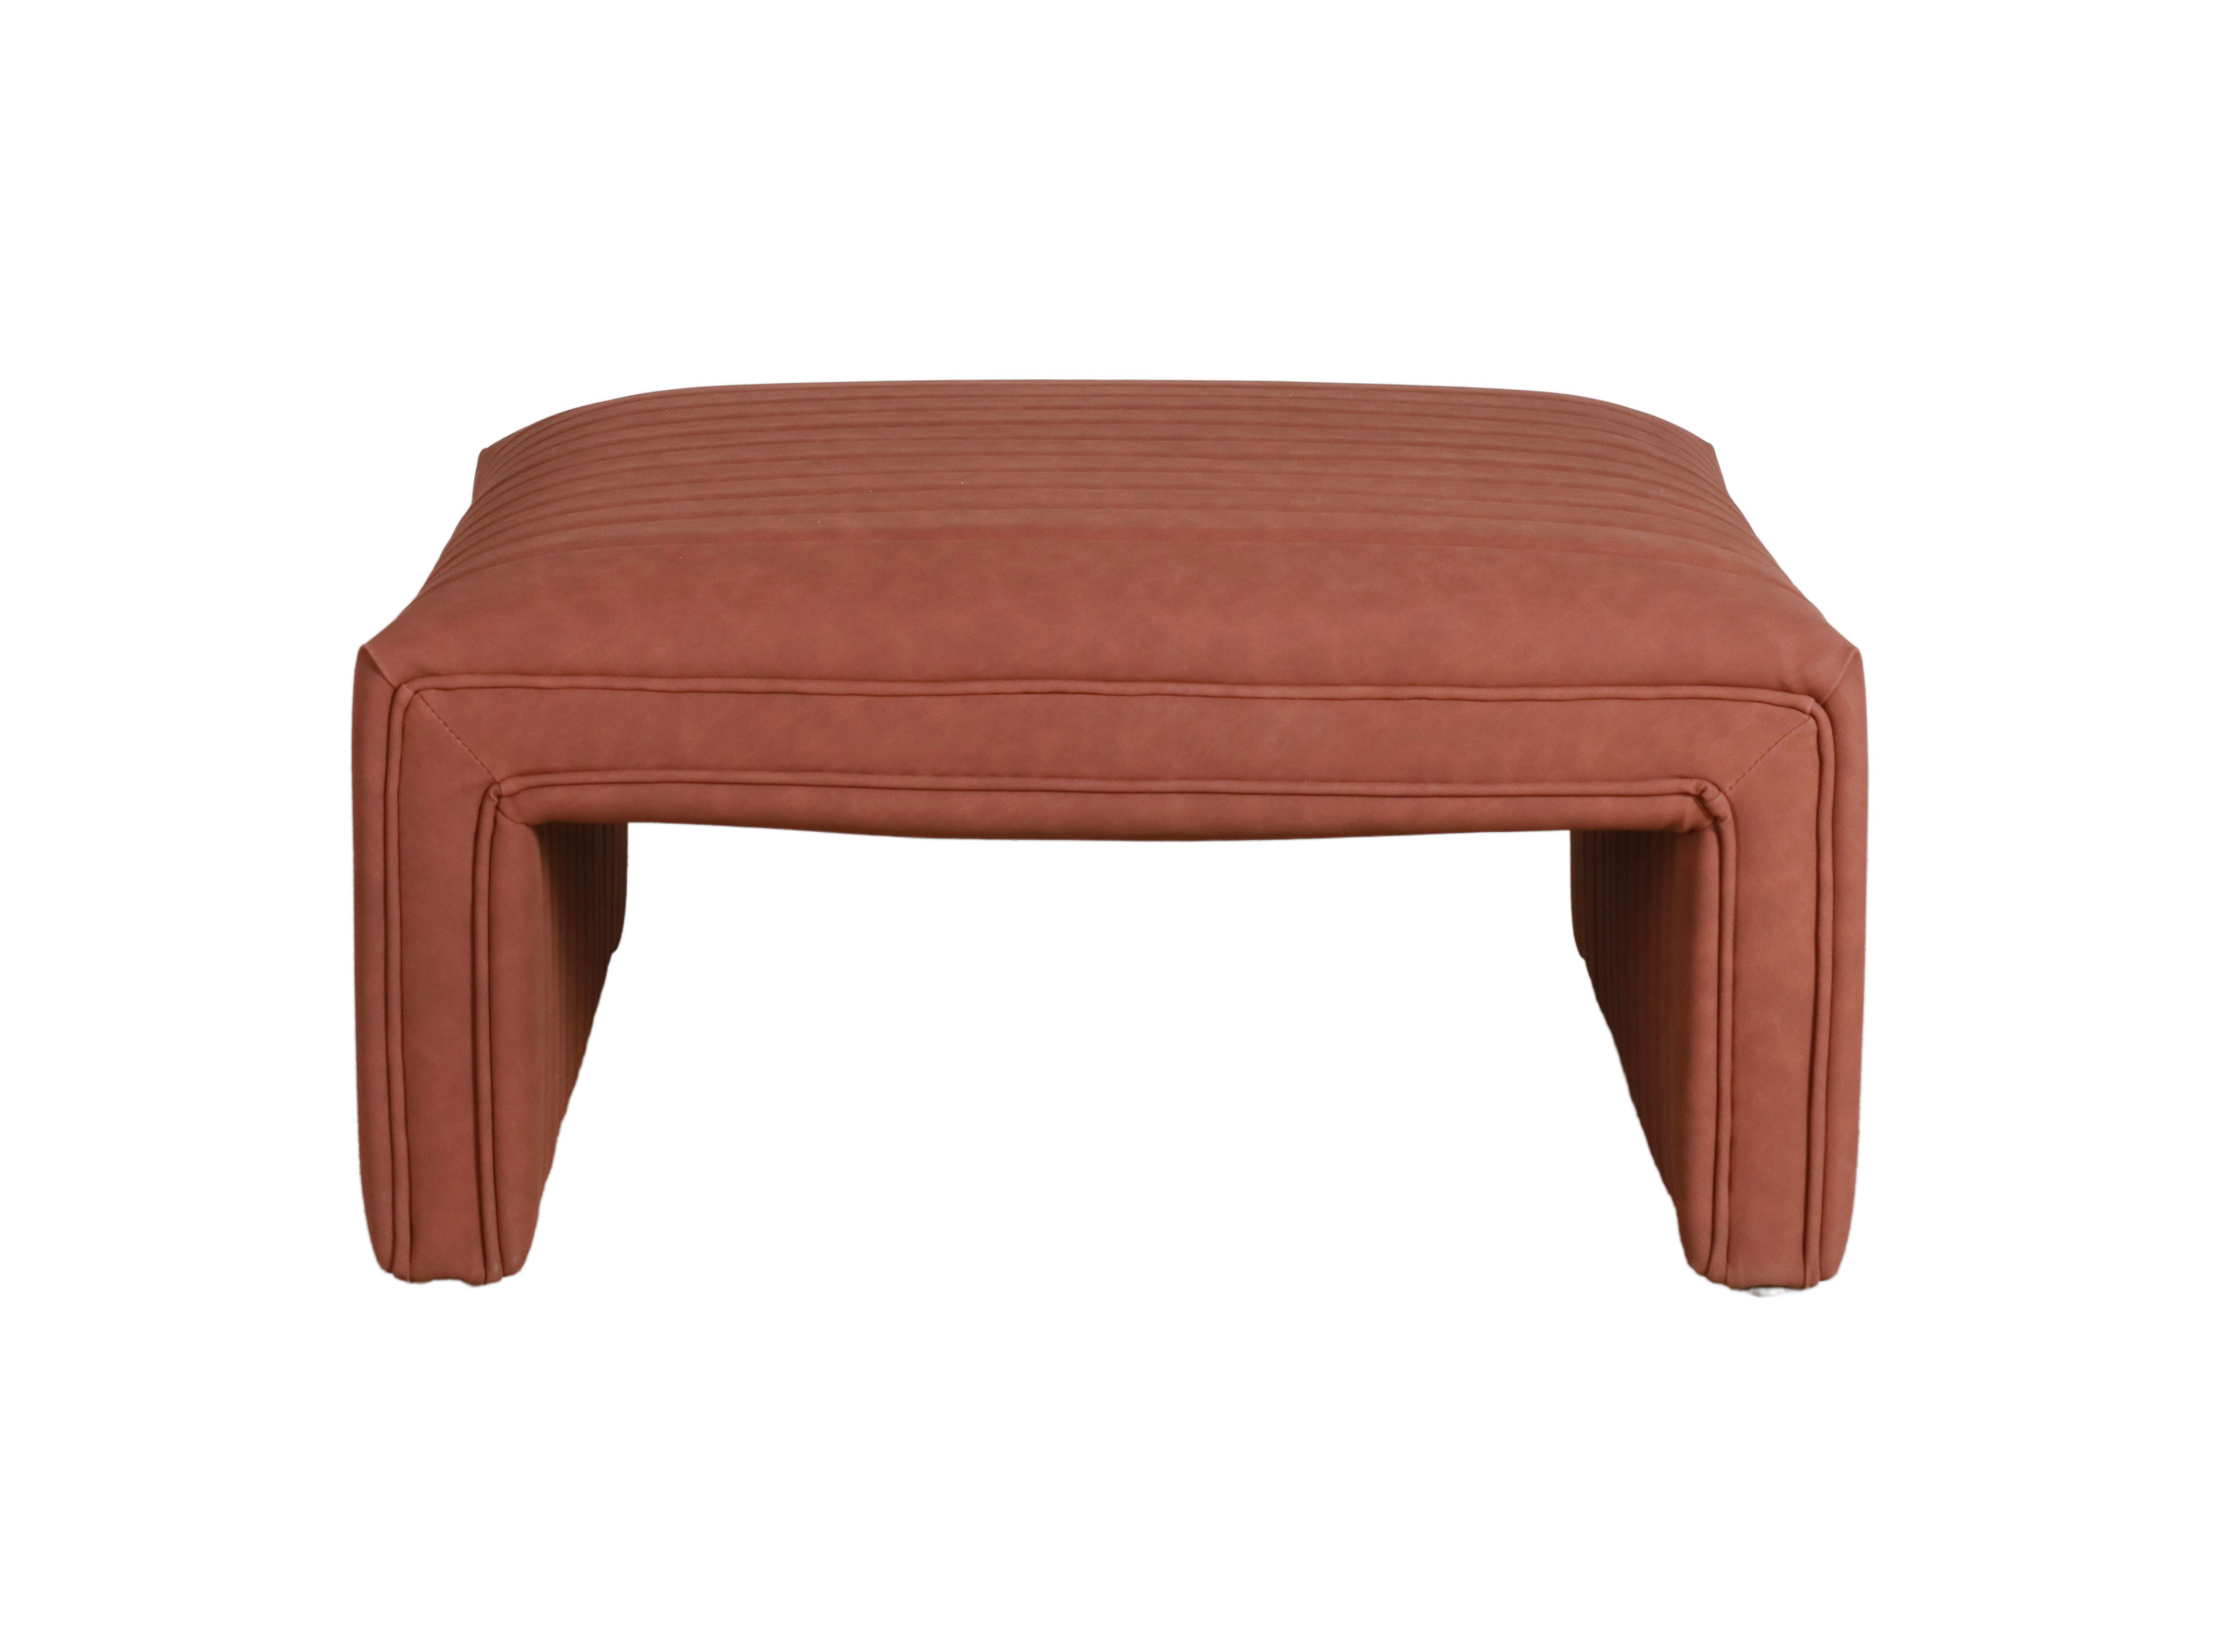 Fully upholstered PU leather ottoman 